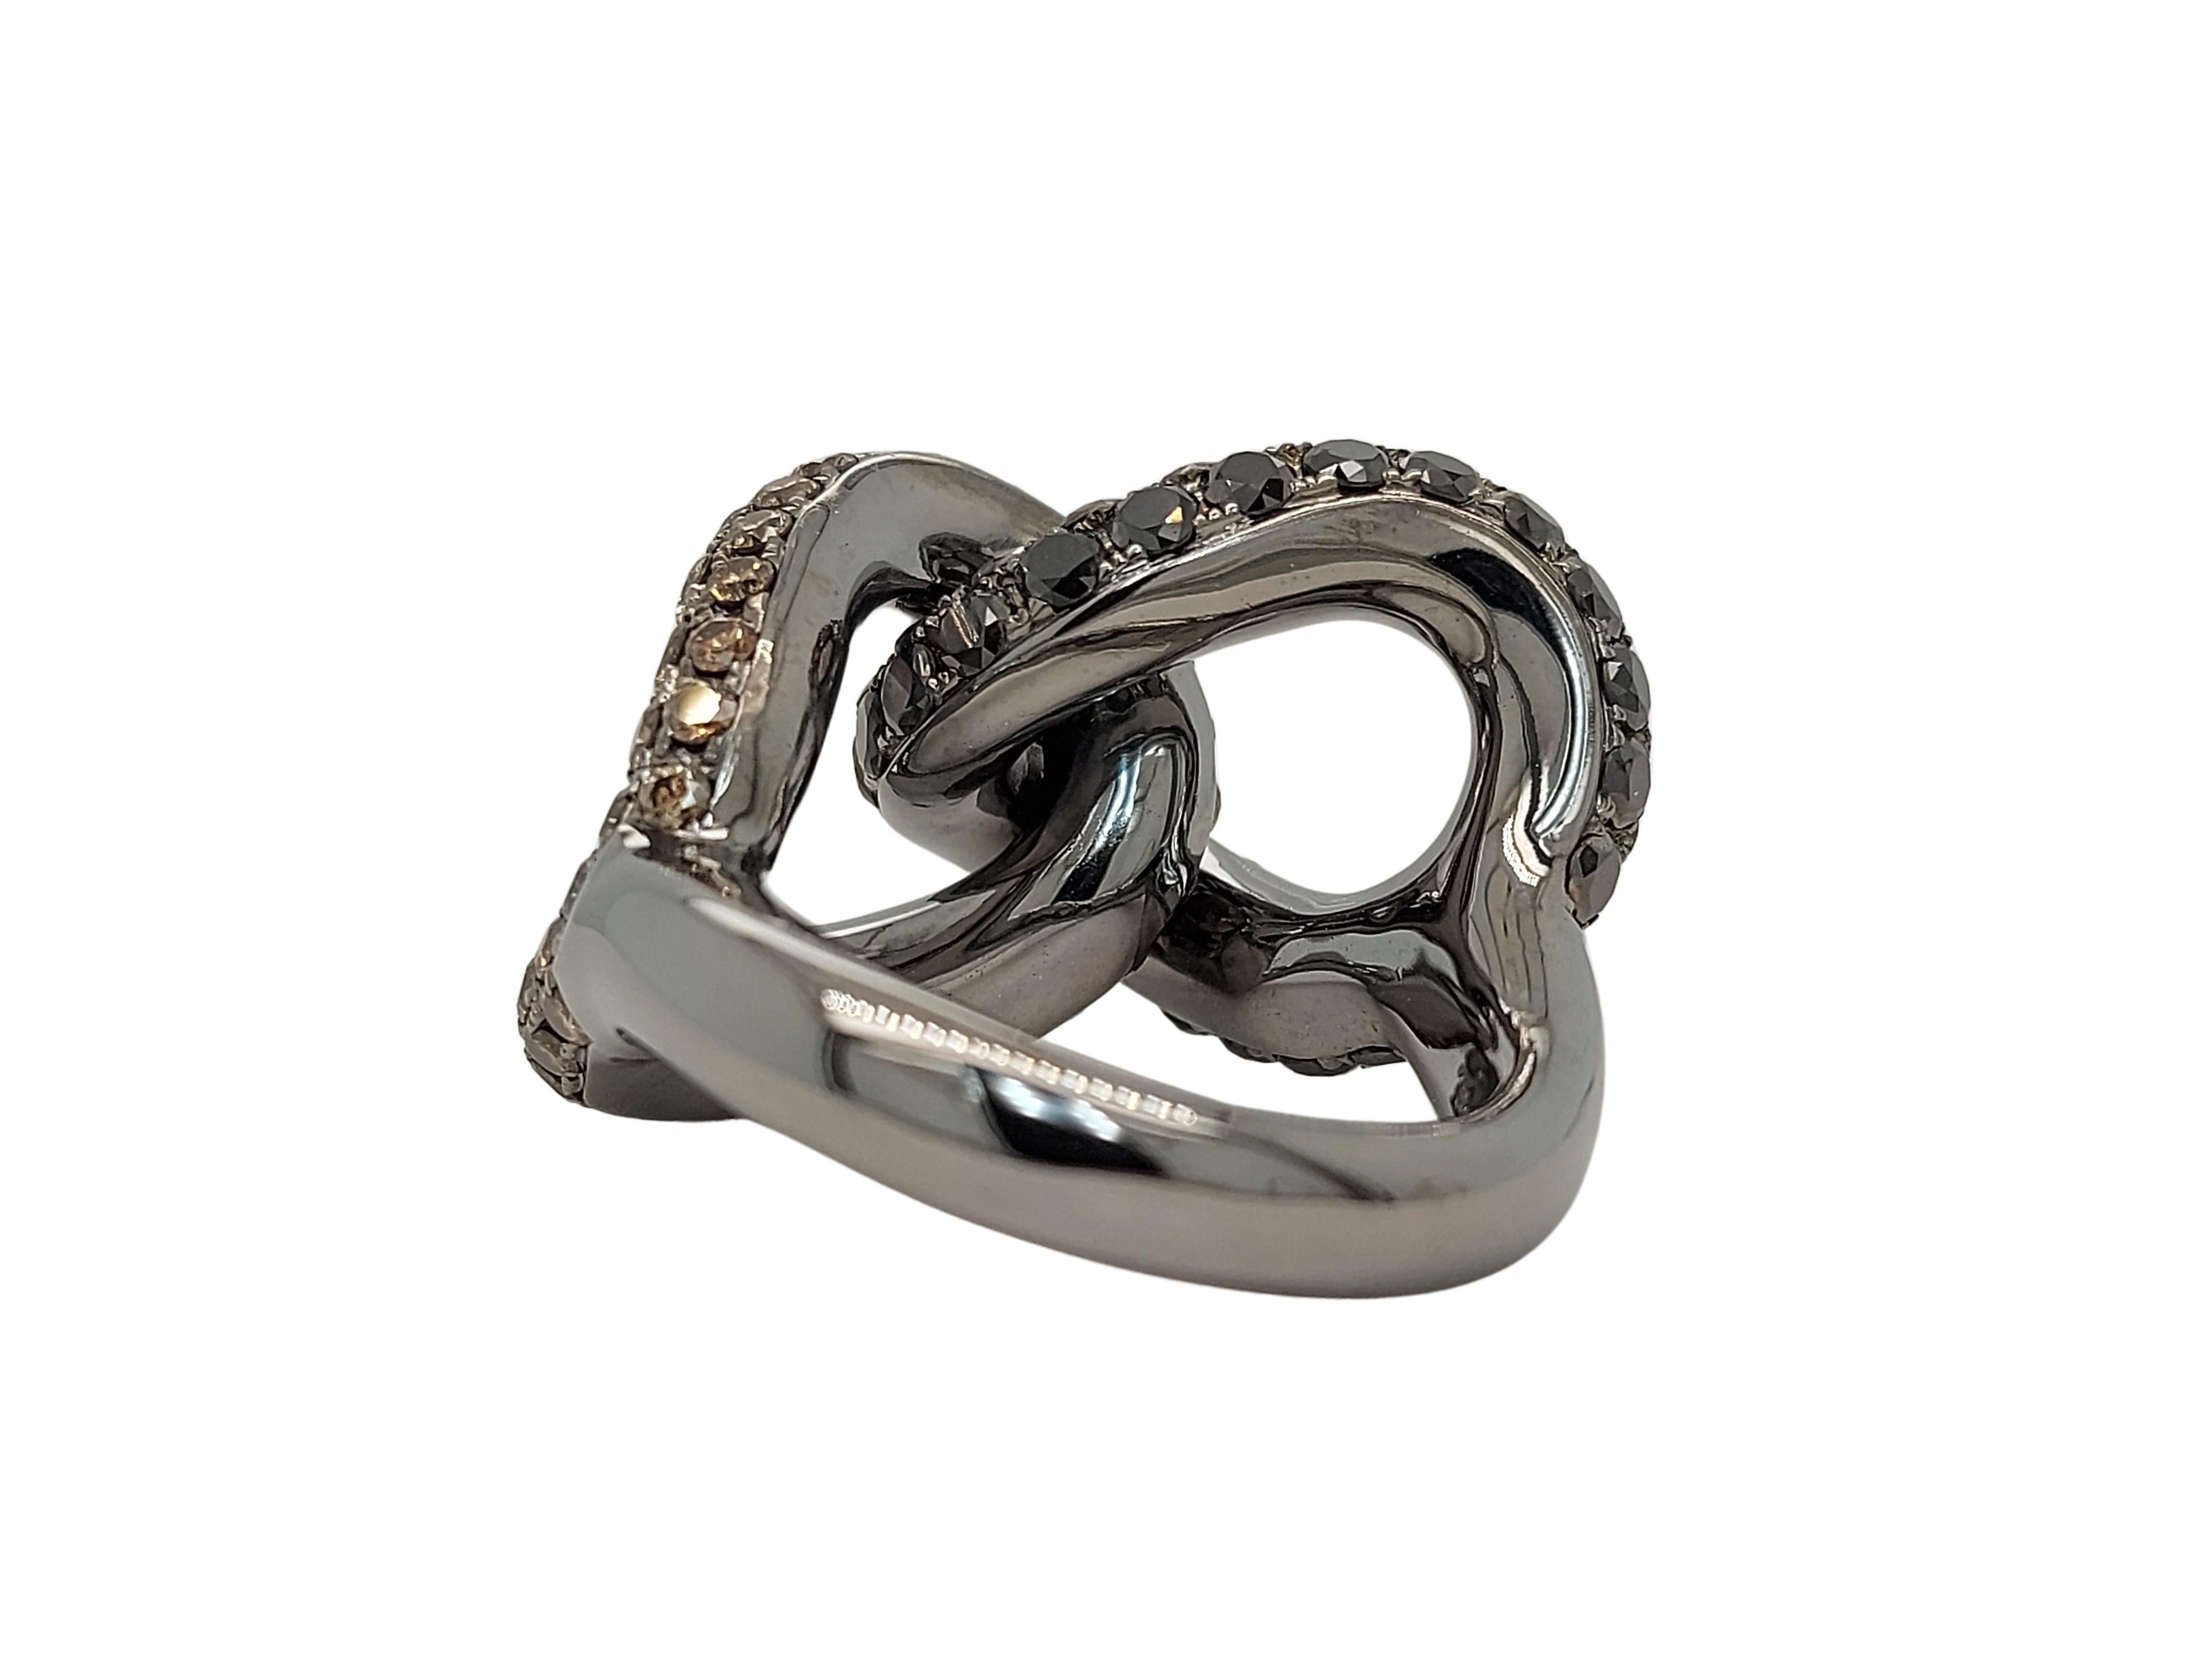 Artisan Magnificent 18kt White Gold Ring with 5.3ct Cognac & Black Diamonds, Black Rodiu For Sale